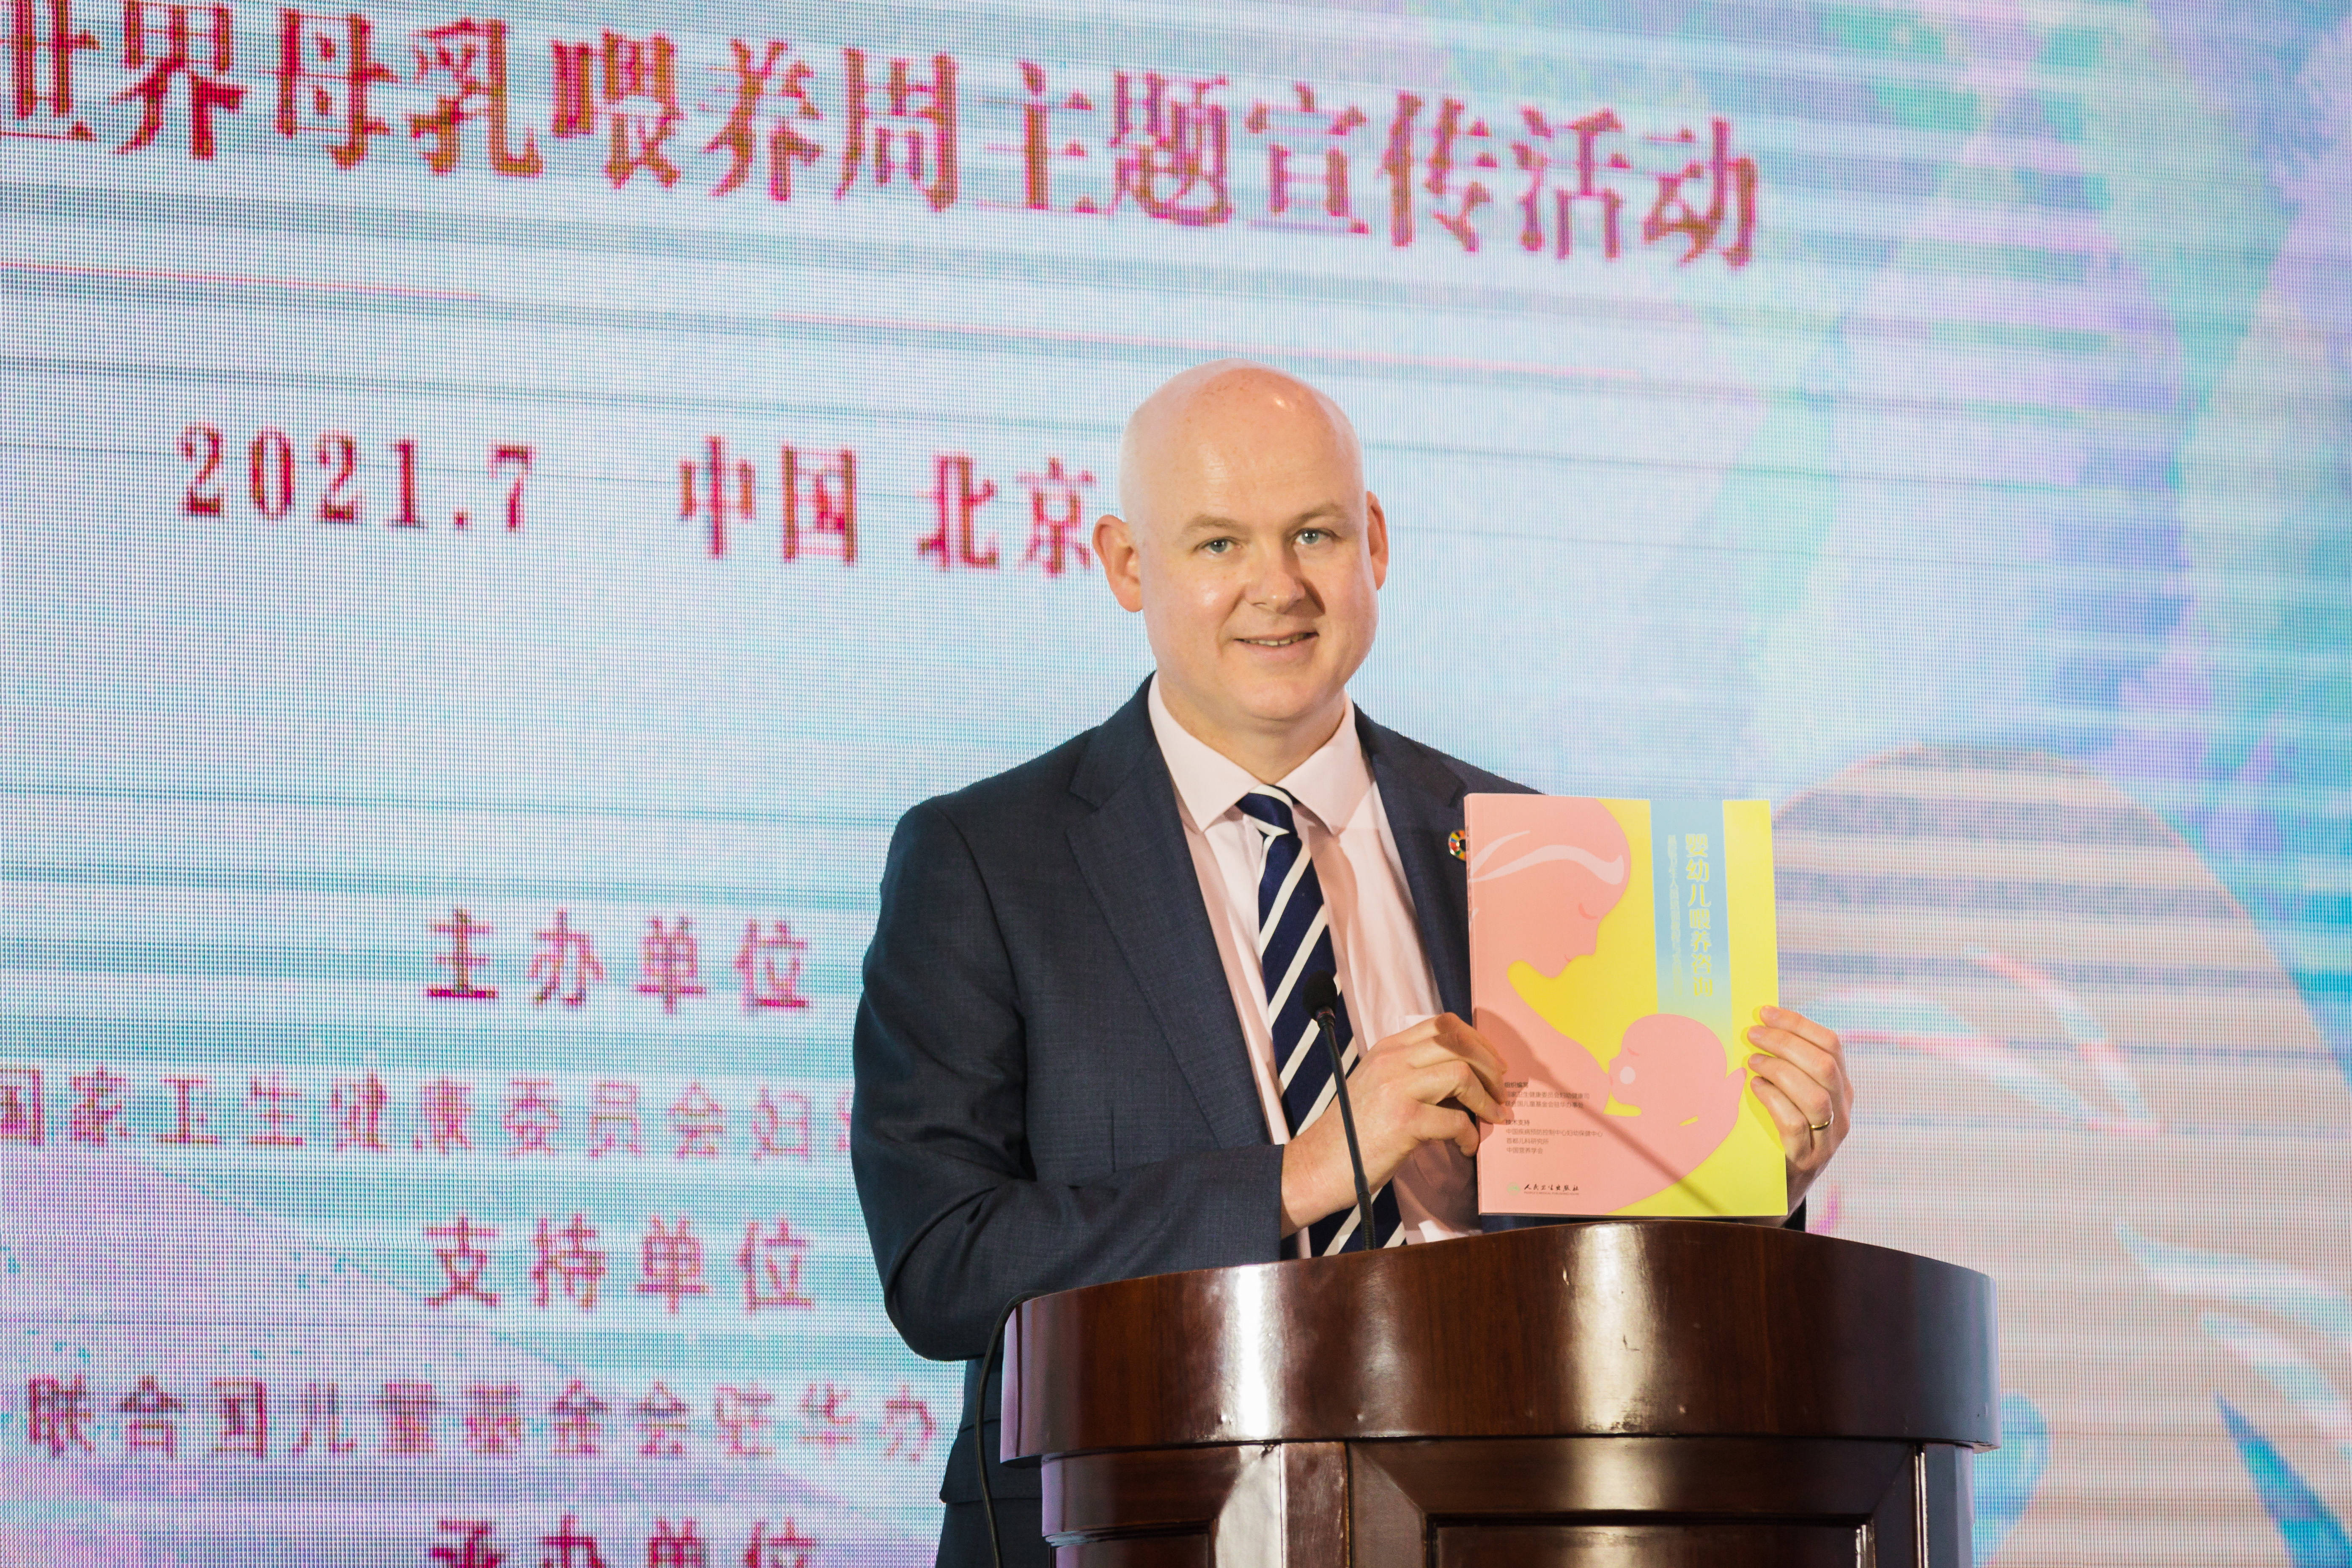 Dr. Douglas Noble, Acting Representative of UNICEF China, delivers a speech on the World Breastfeeding Week celebration in Beijing on 27 Jul, 2021.